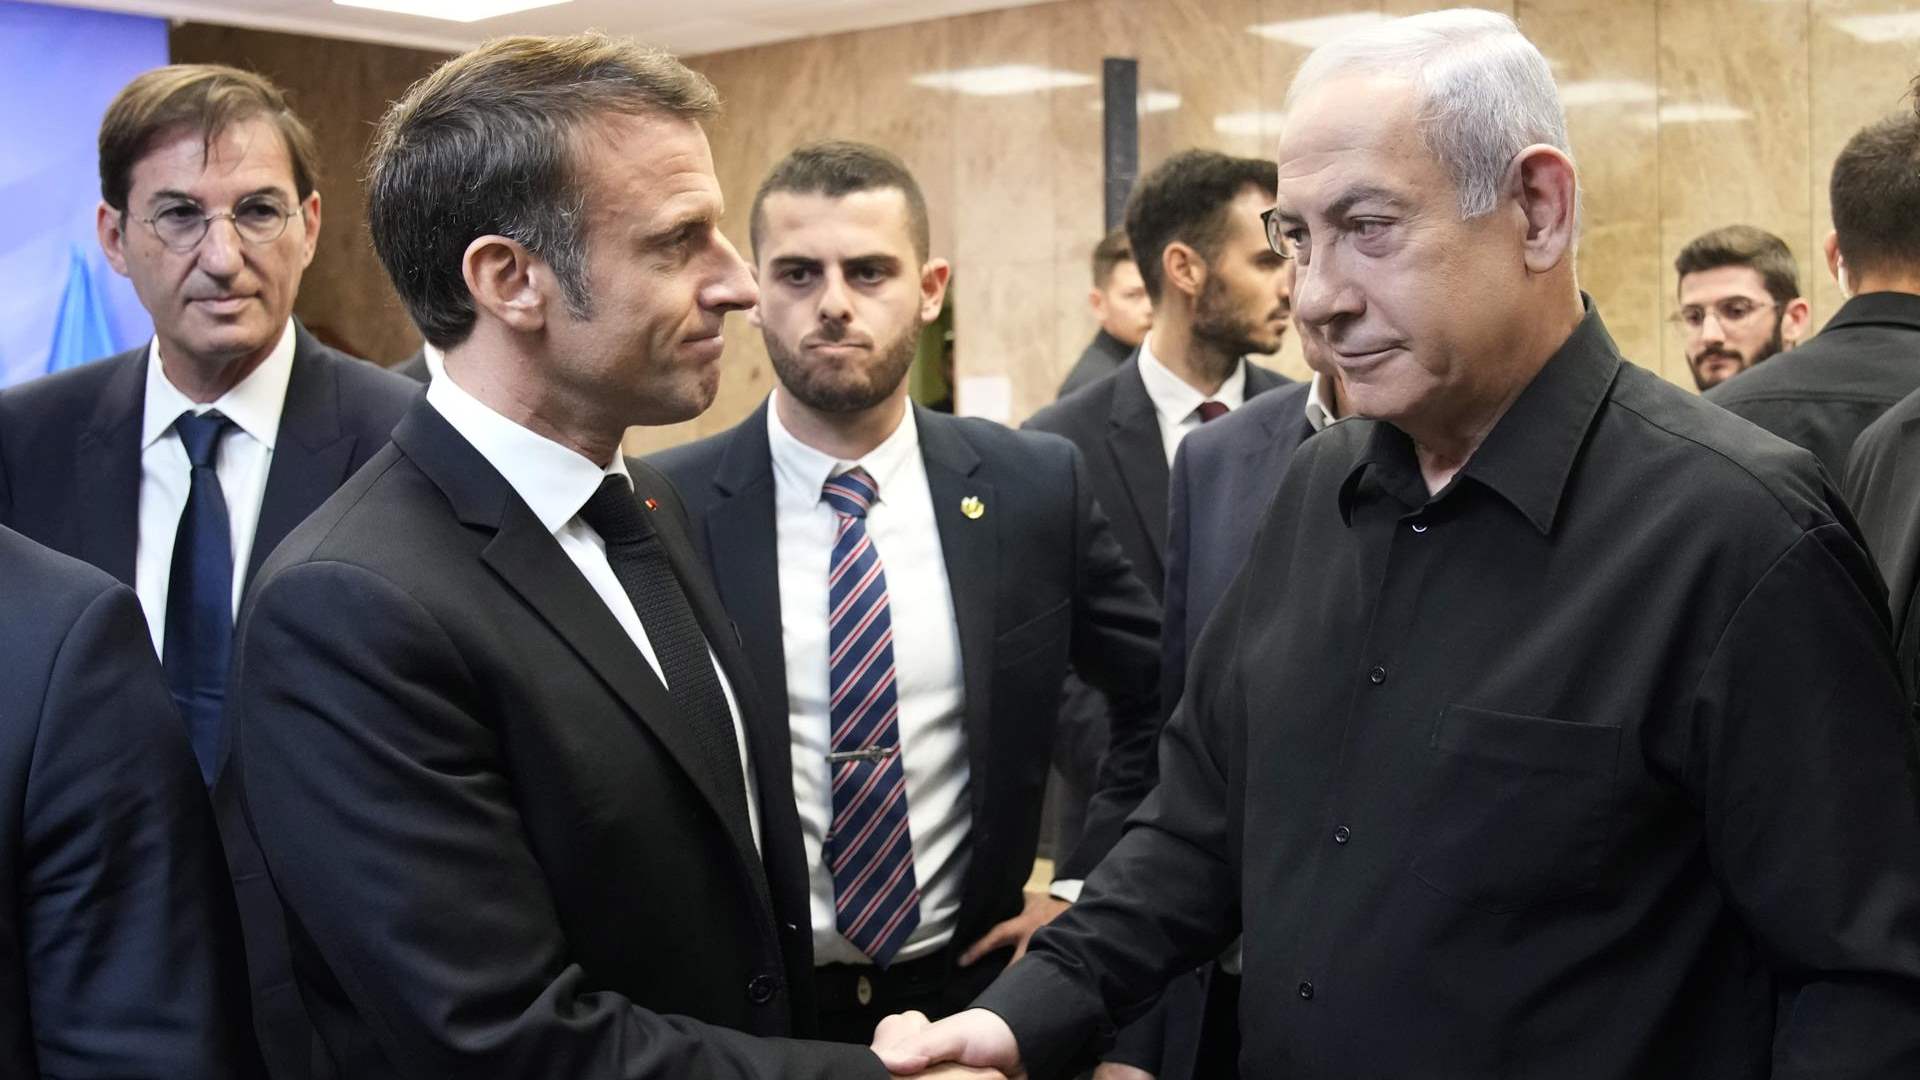 Macron to Netanyahu: I did not intend to accuse Israel of intentionally harming civilians